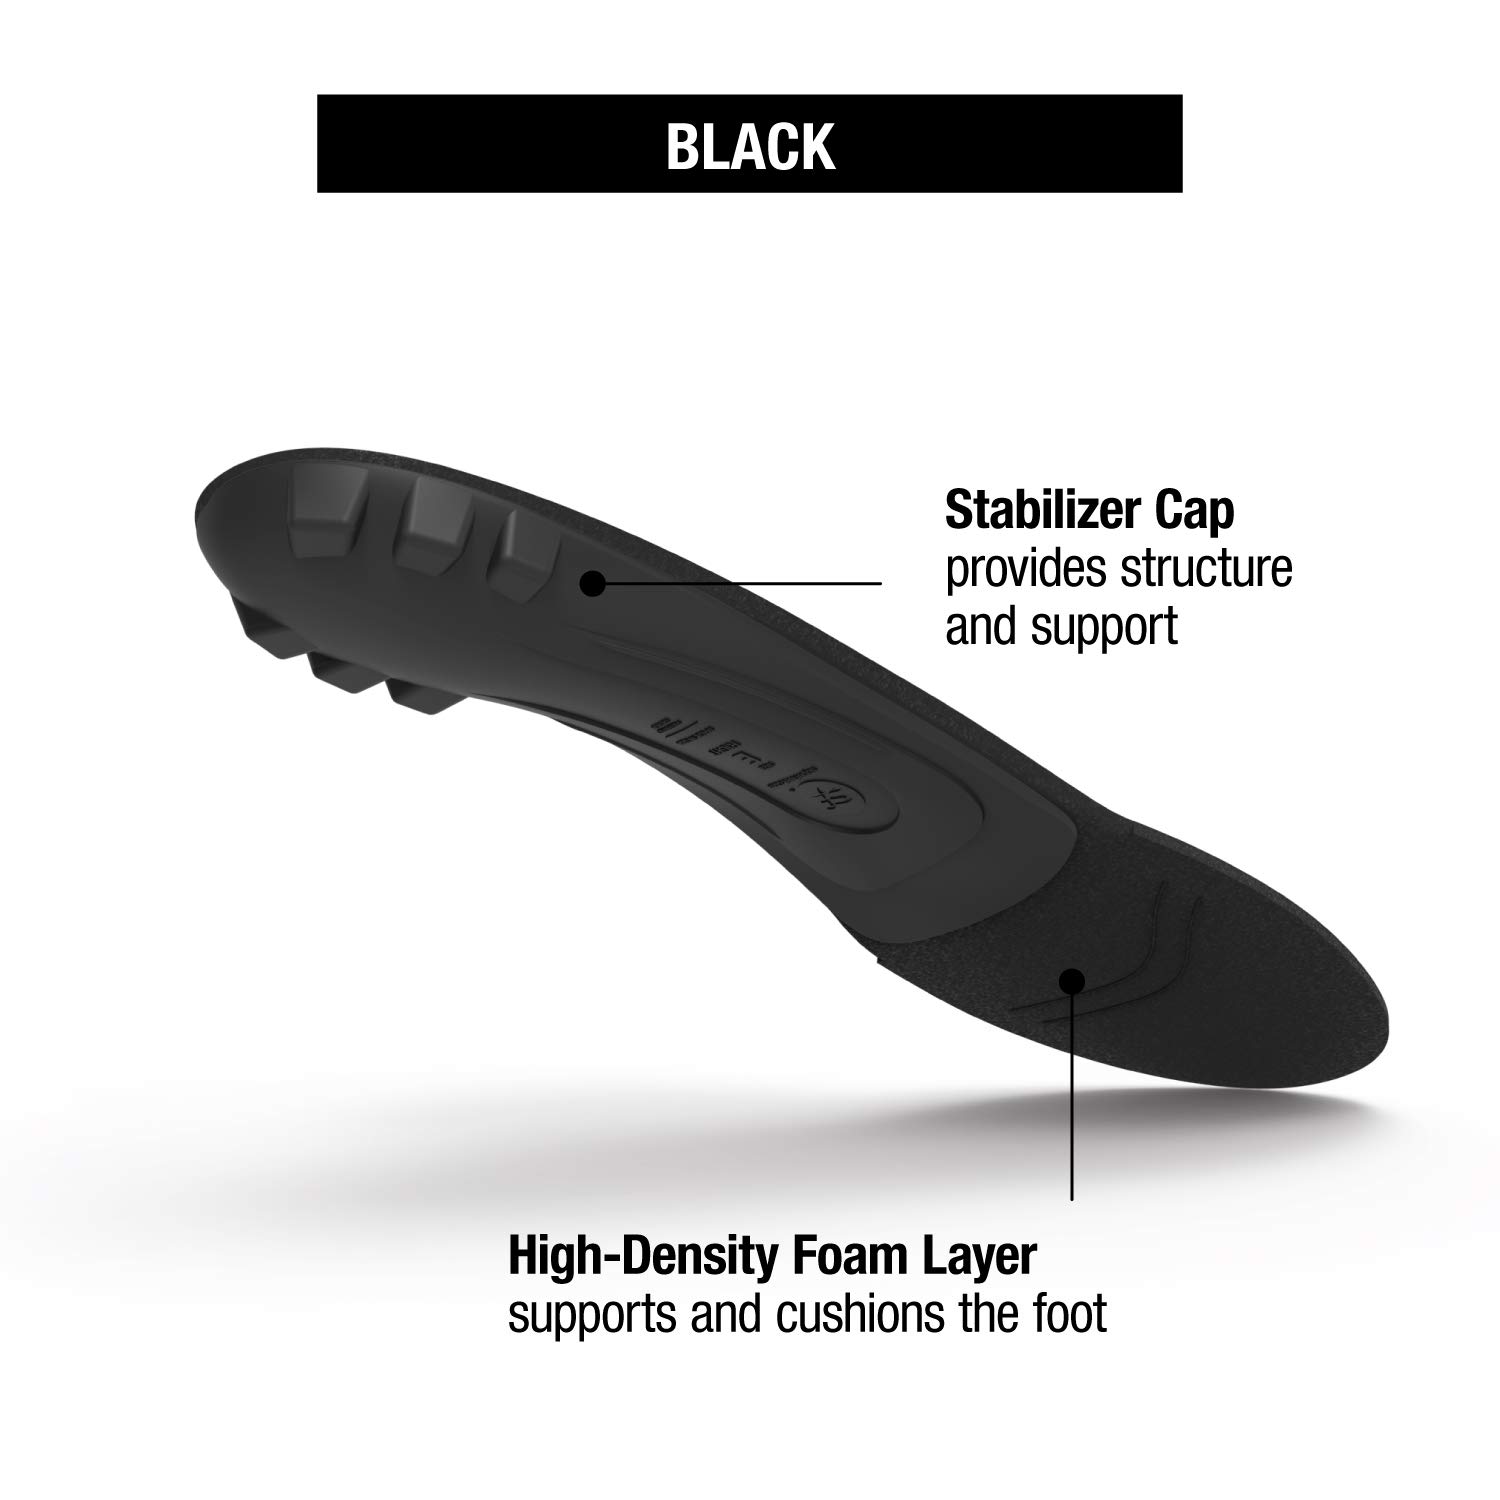 Superfeet black, thin Insoles for orthotic support in tight shoes, dress and athletic footwear, unisex, black, large/e: 10.5-12 wmns/9.5-11 Men's - image 2 of 3